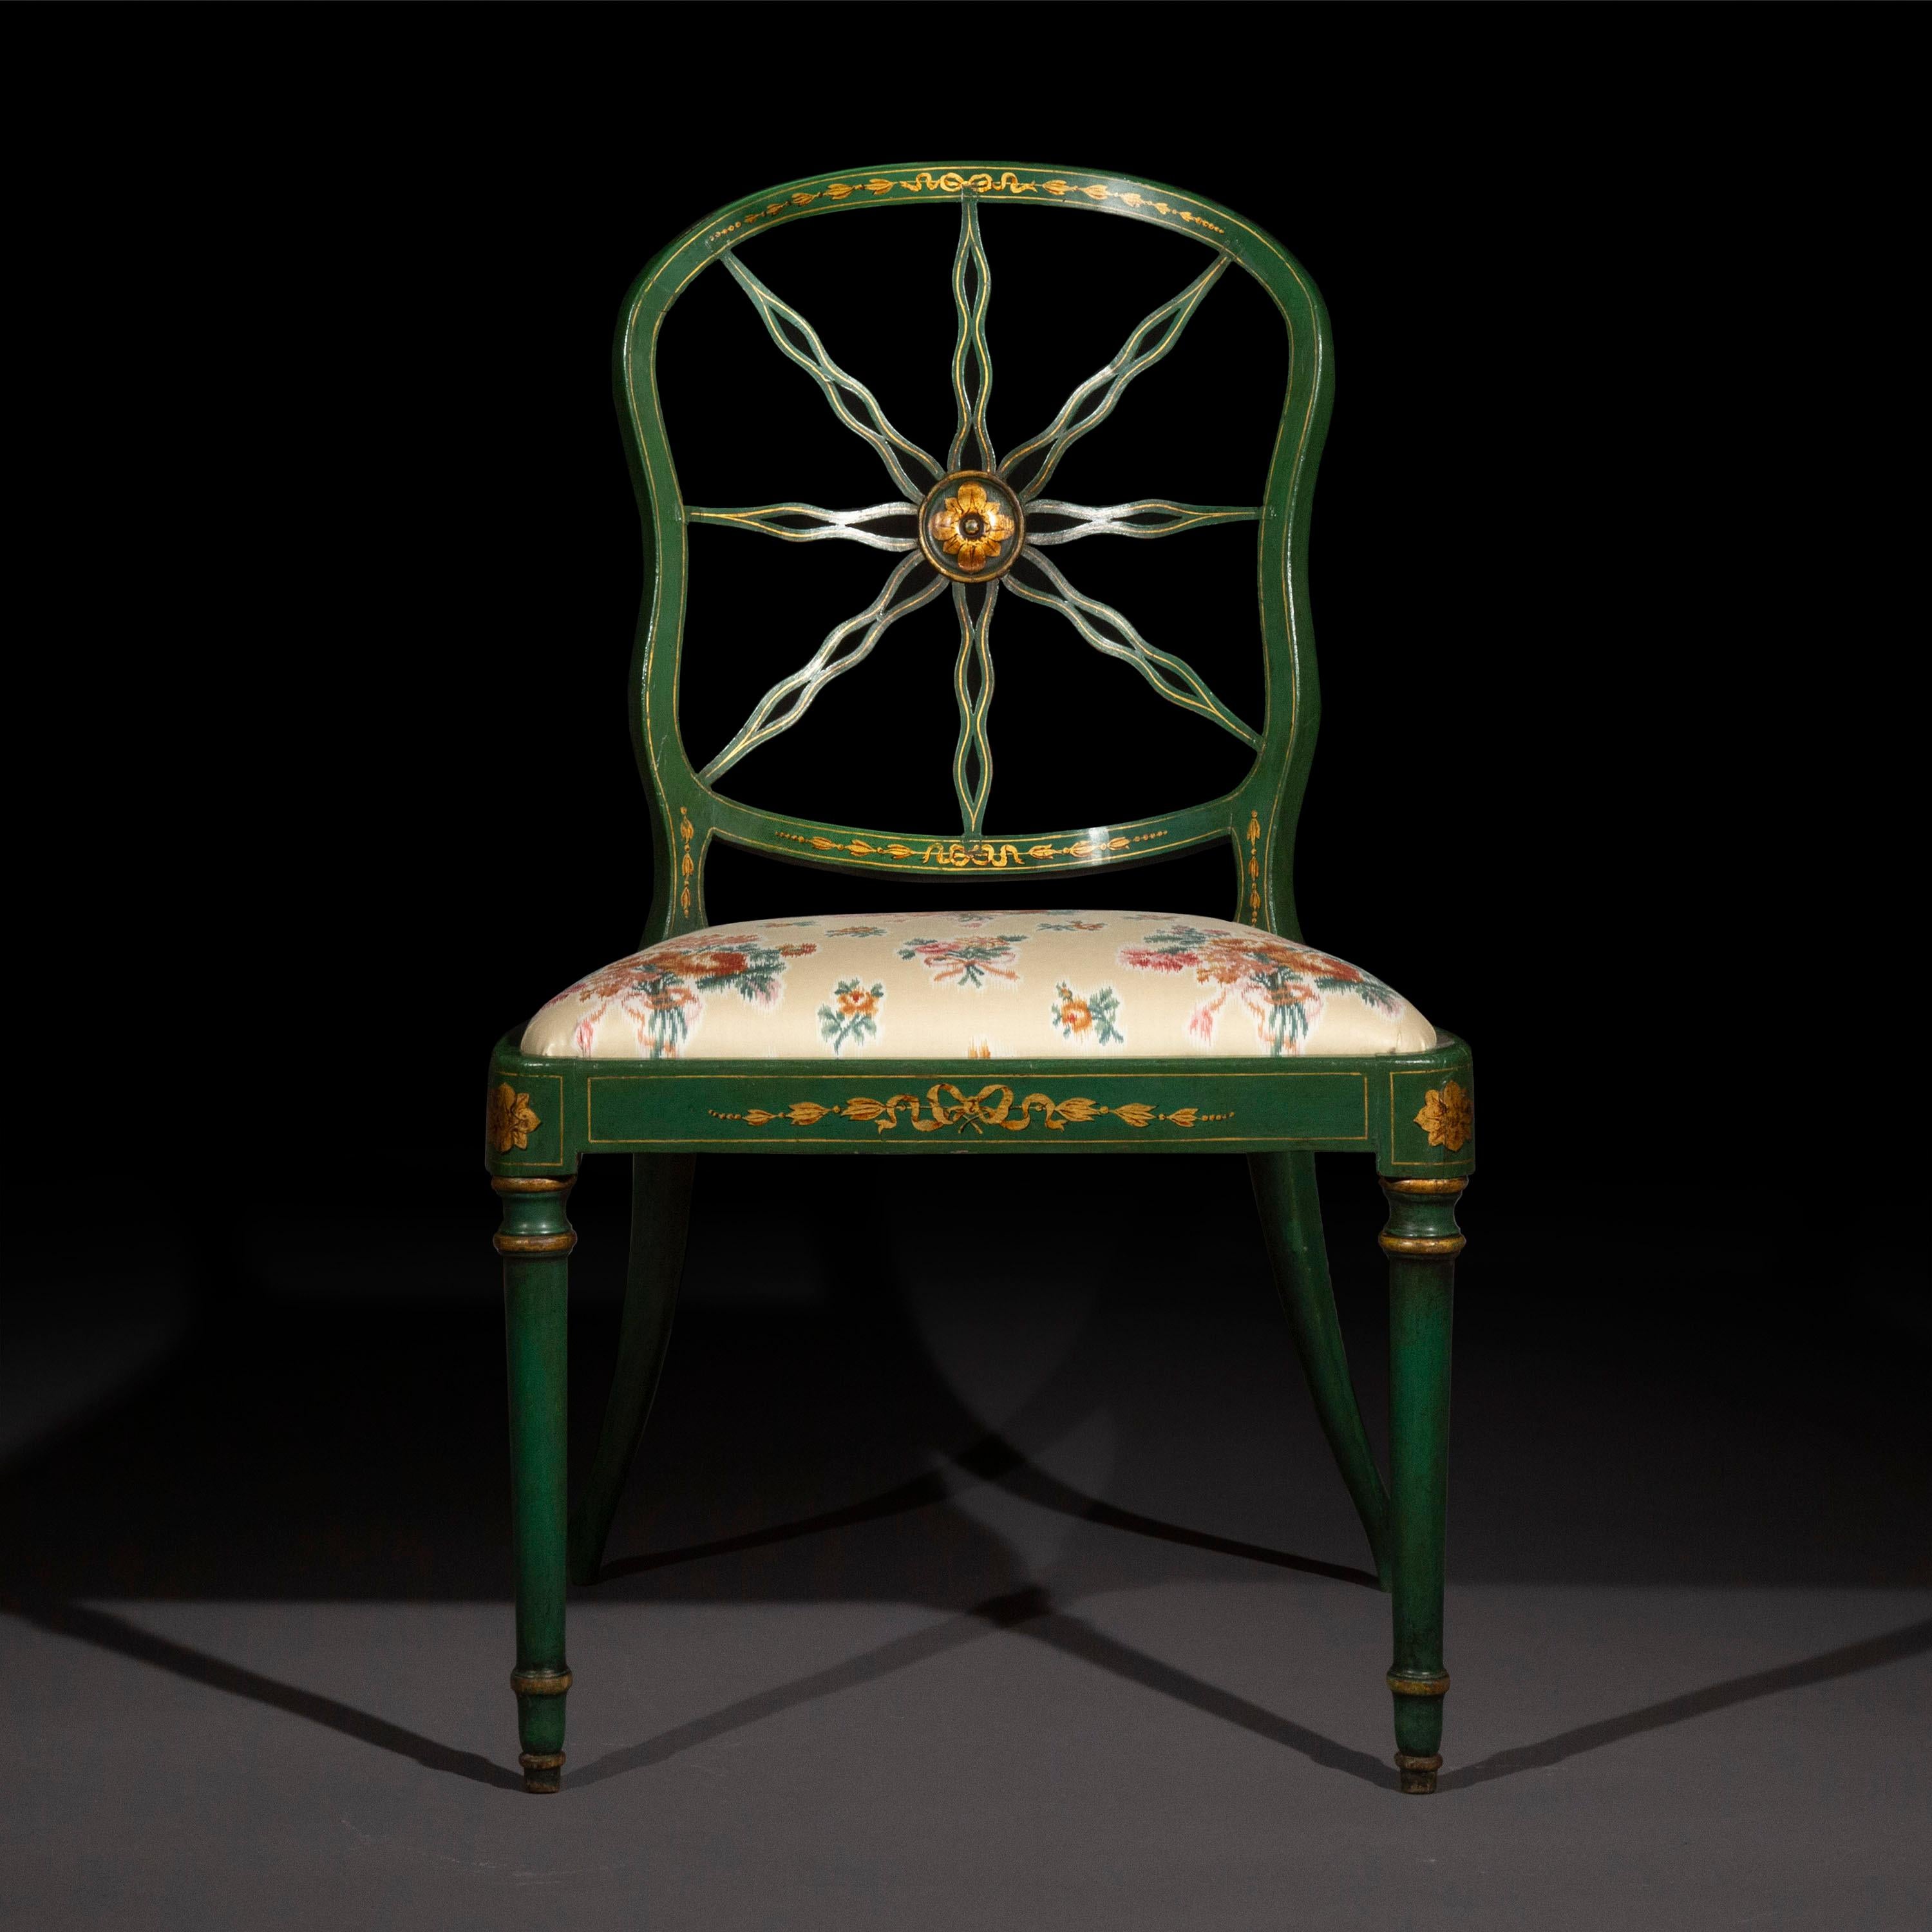 19th Century Pair of Antique Green Painted Chairs - 3 pairs available